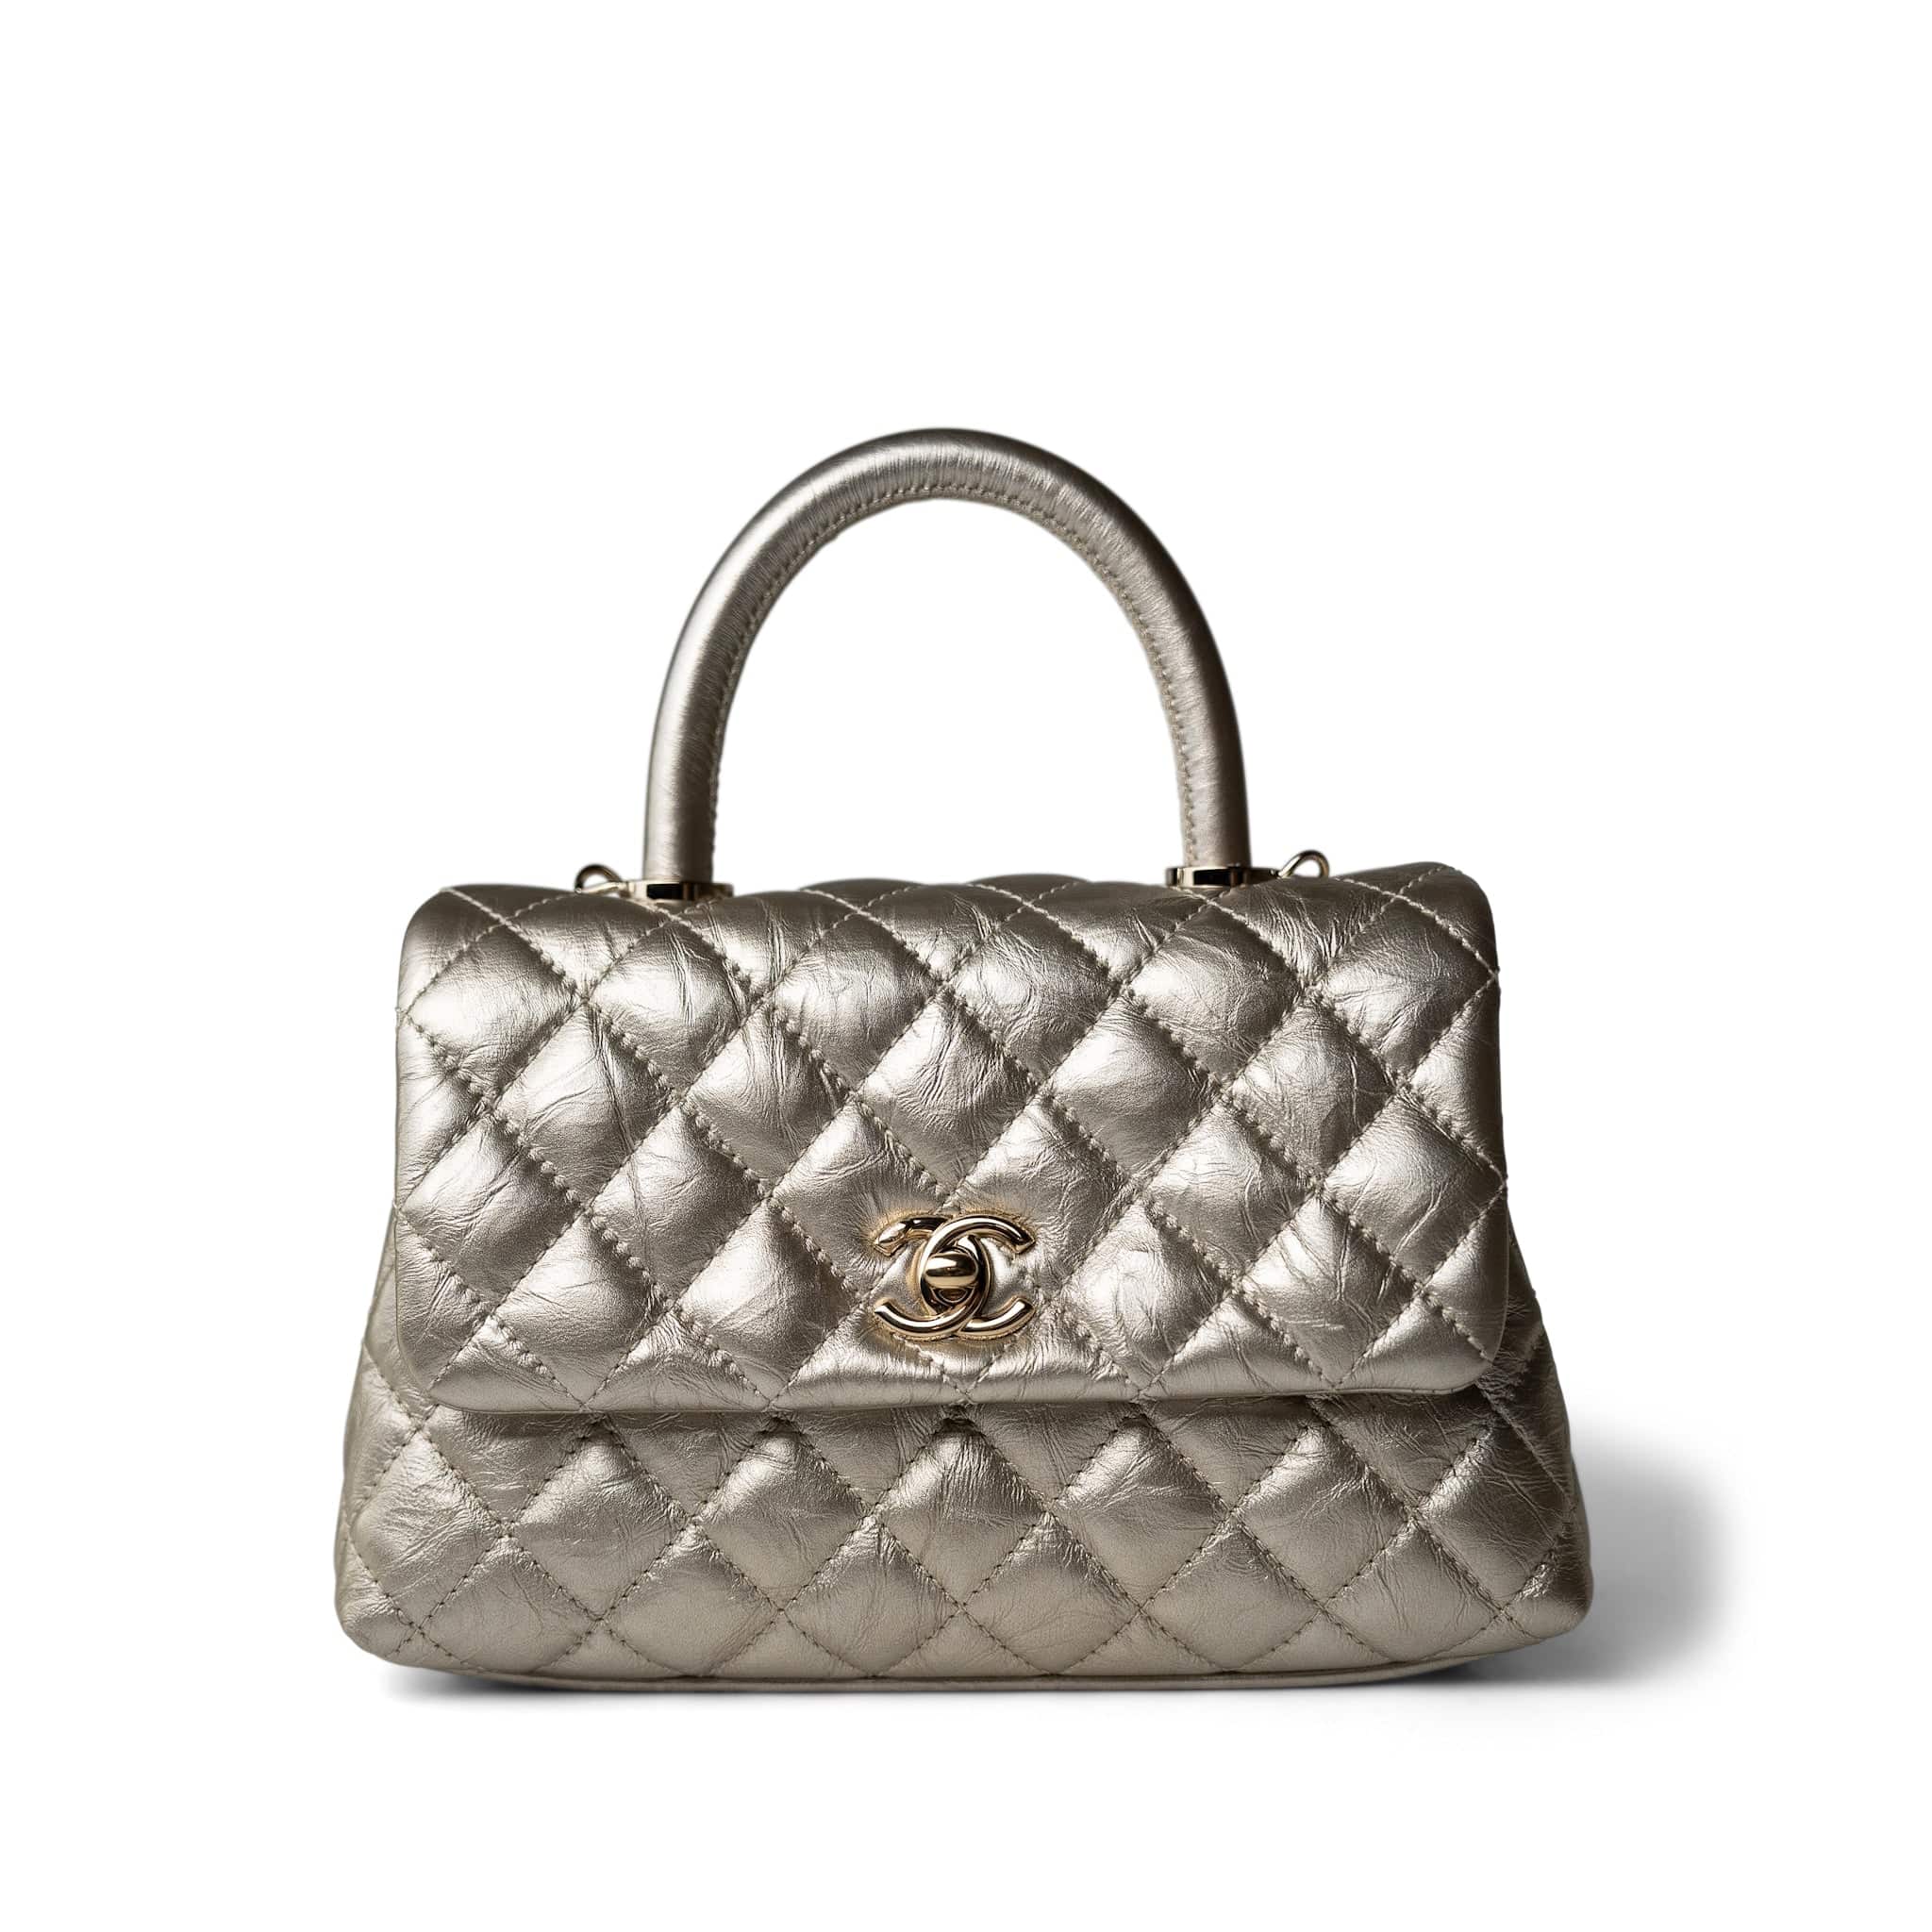 CHANEL Handbag Metallic 20A Metallic Aged Calfskin Quilted Mini Coco Handle Light Gold Hardware - Redeluxe